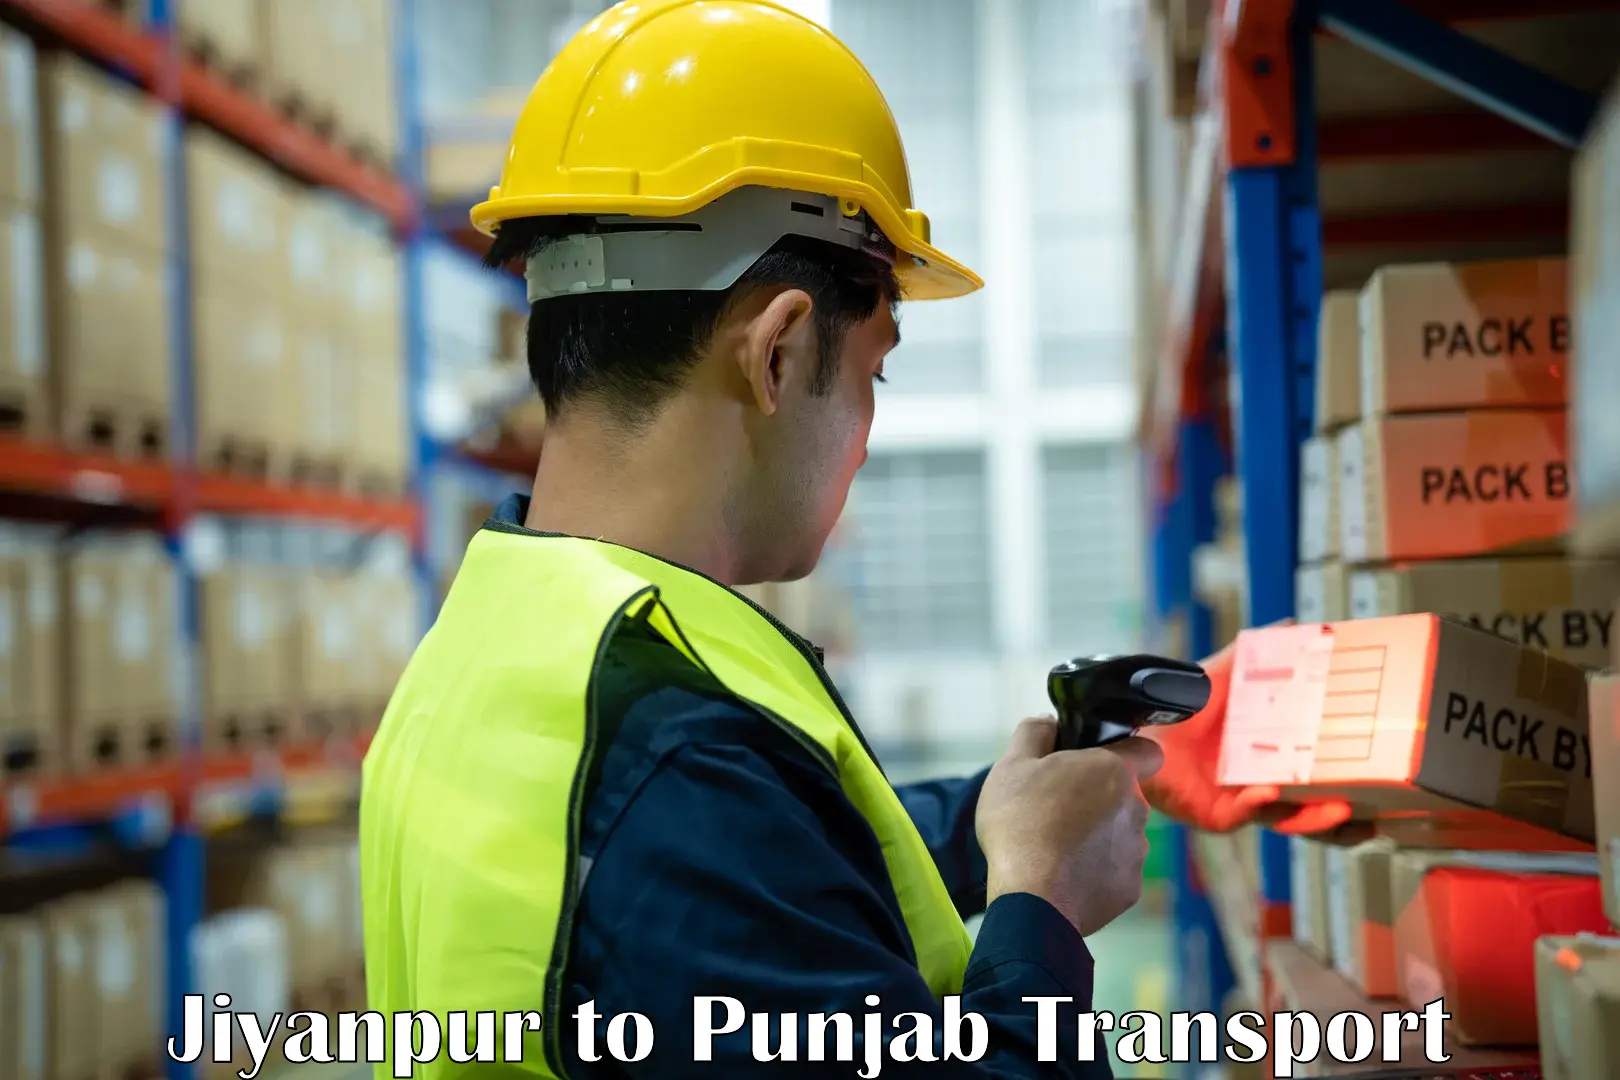 Parcel transport services in Jiyanpur to Punjab